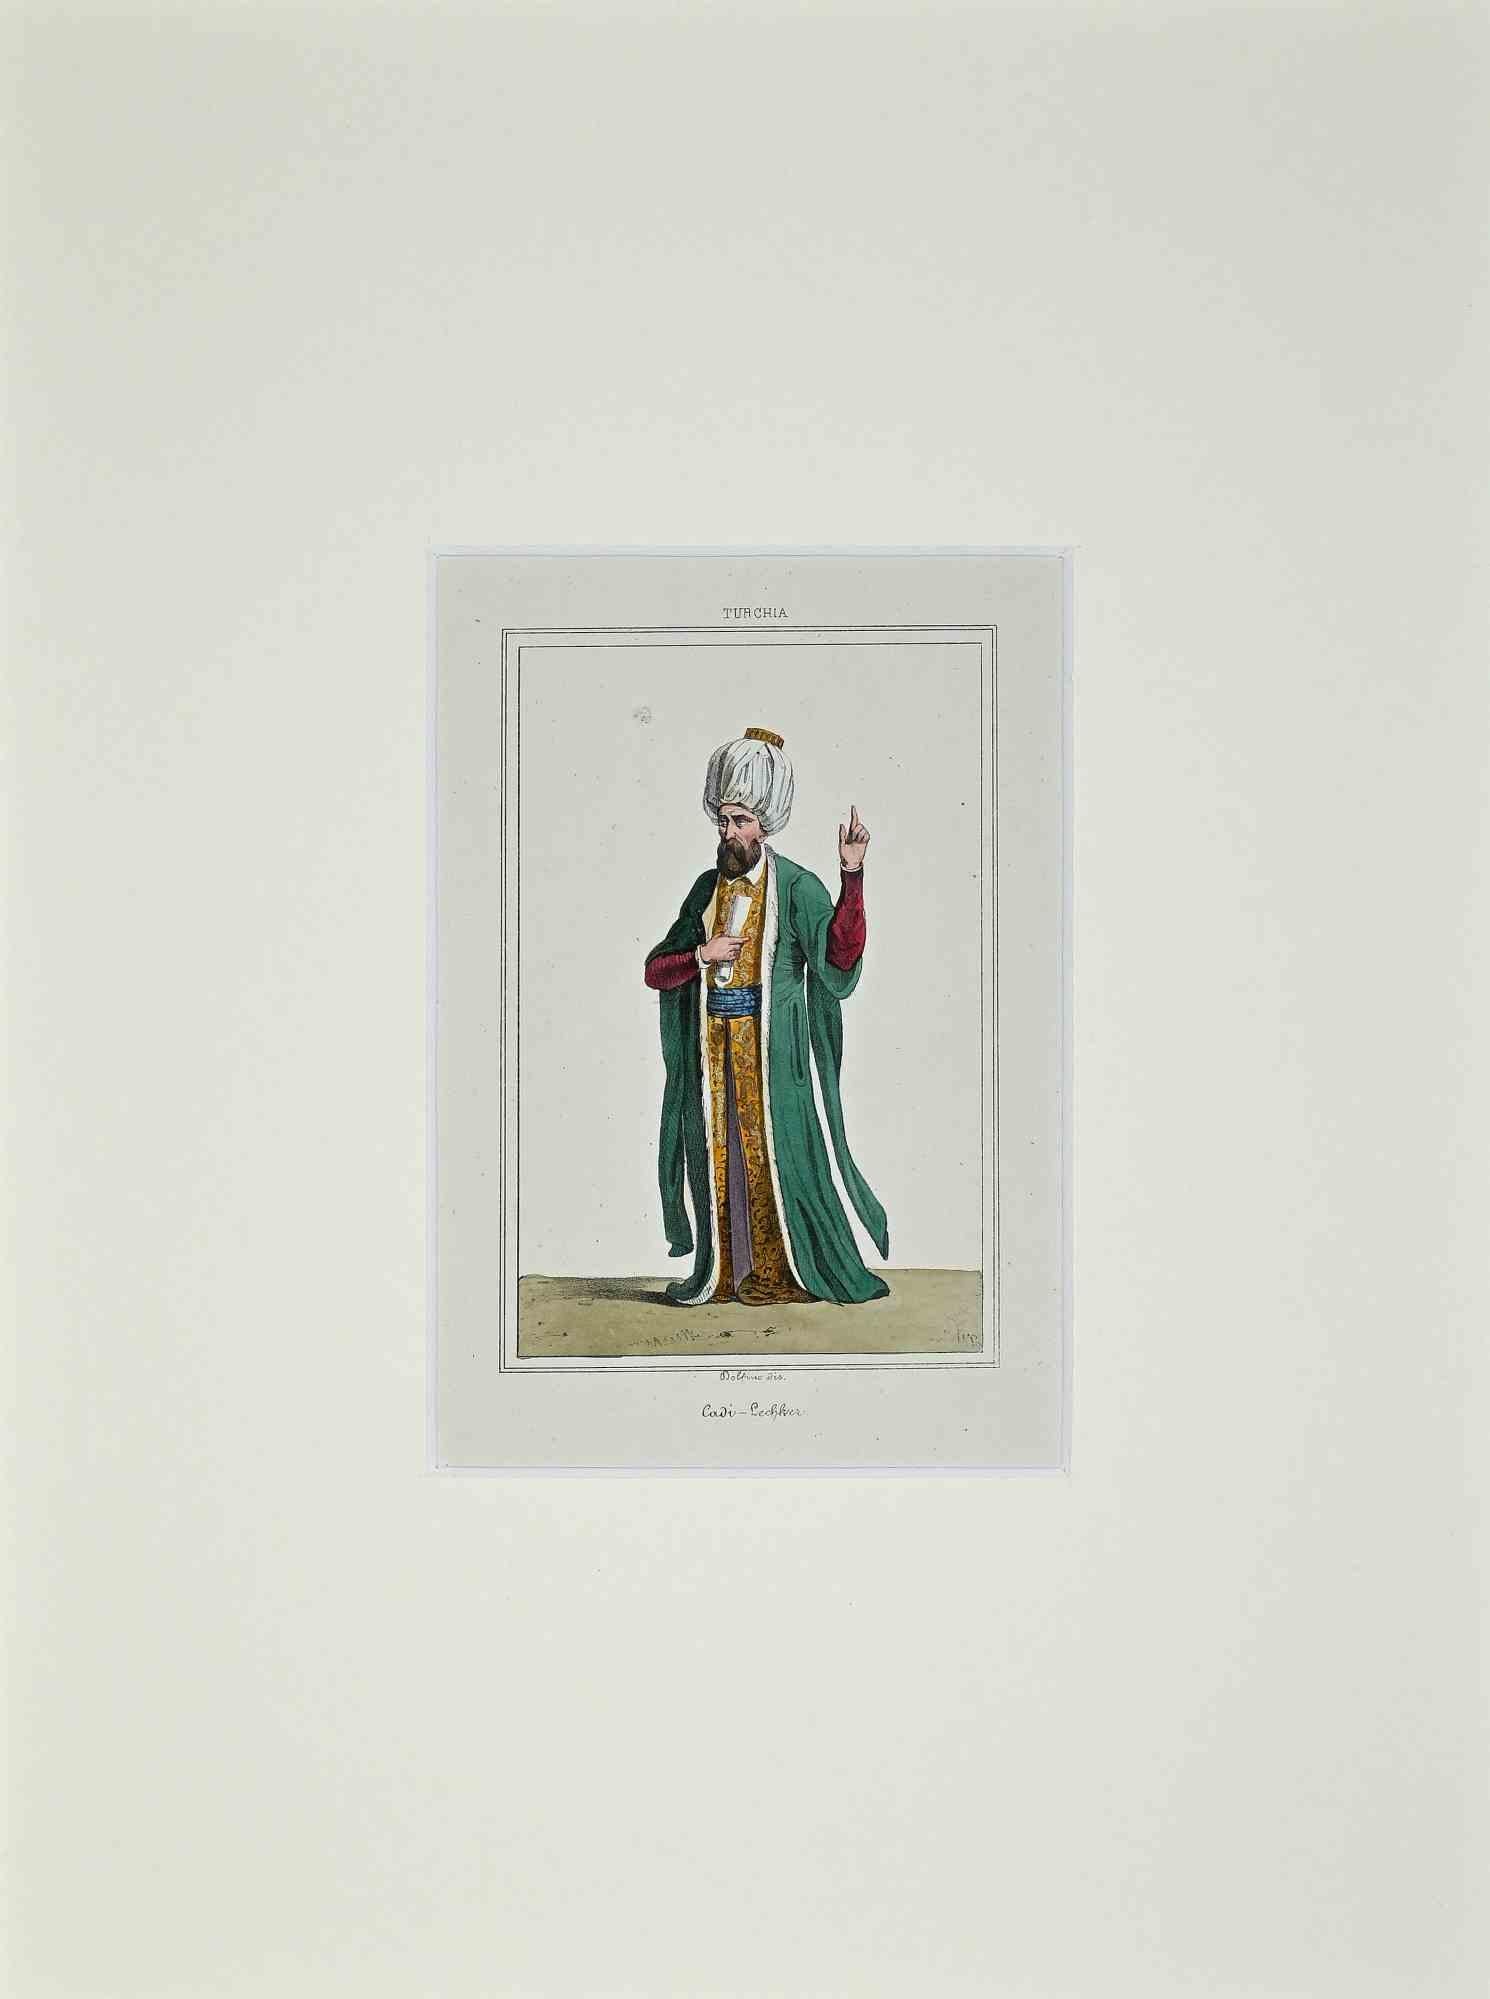 Portrait of Turkish Sultan Cadi-Lechker - Original Lithograph - Mid 19th Century - Print by Unknown